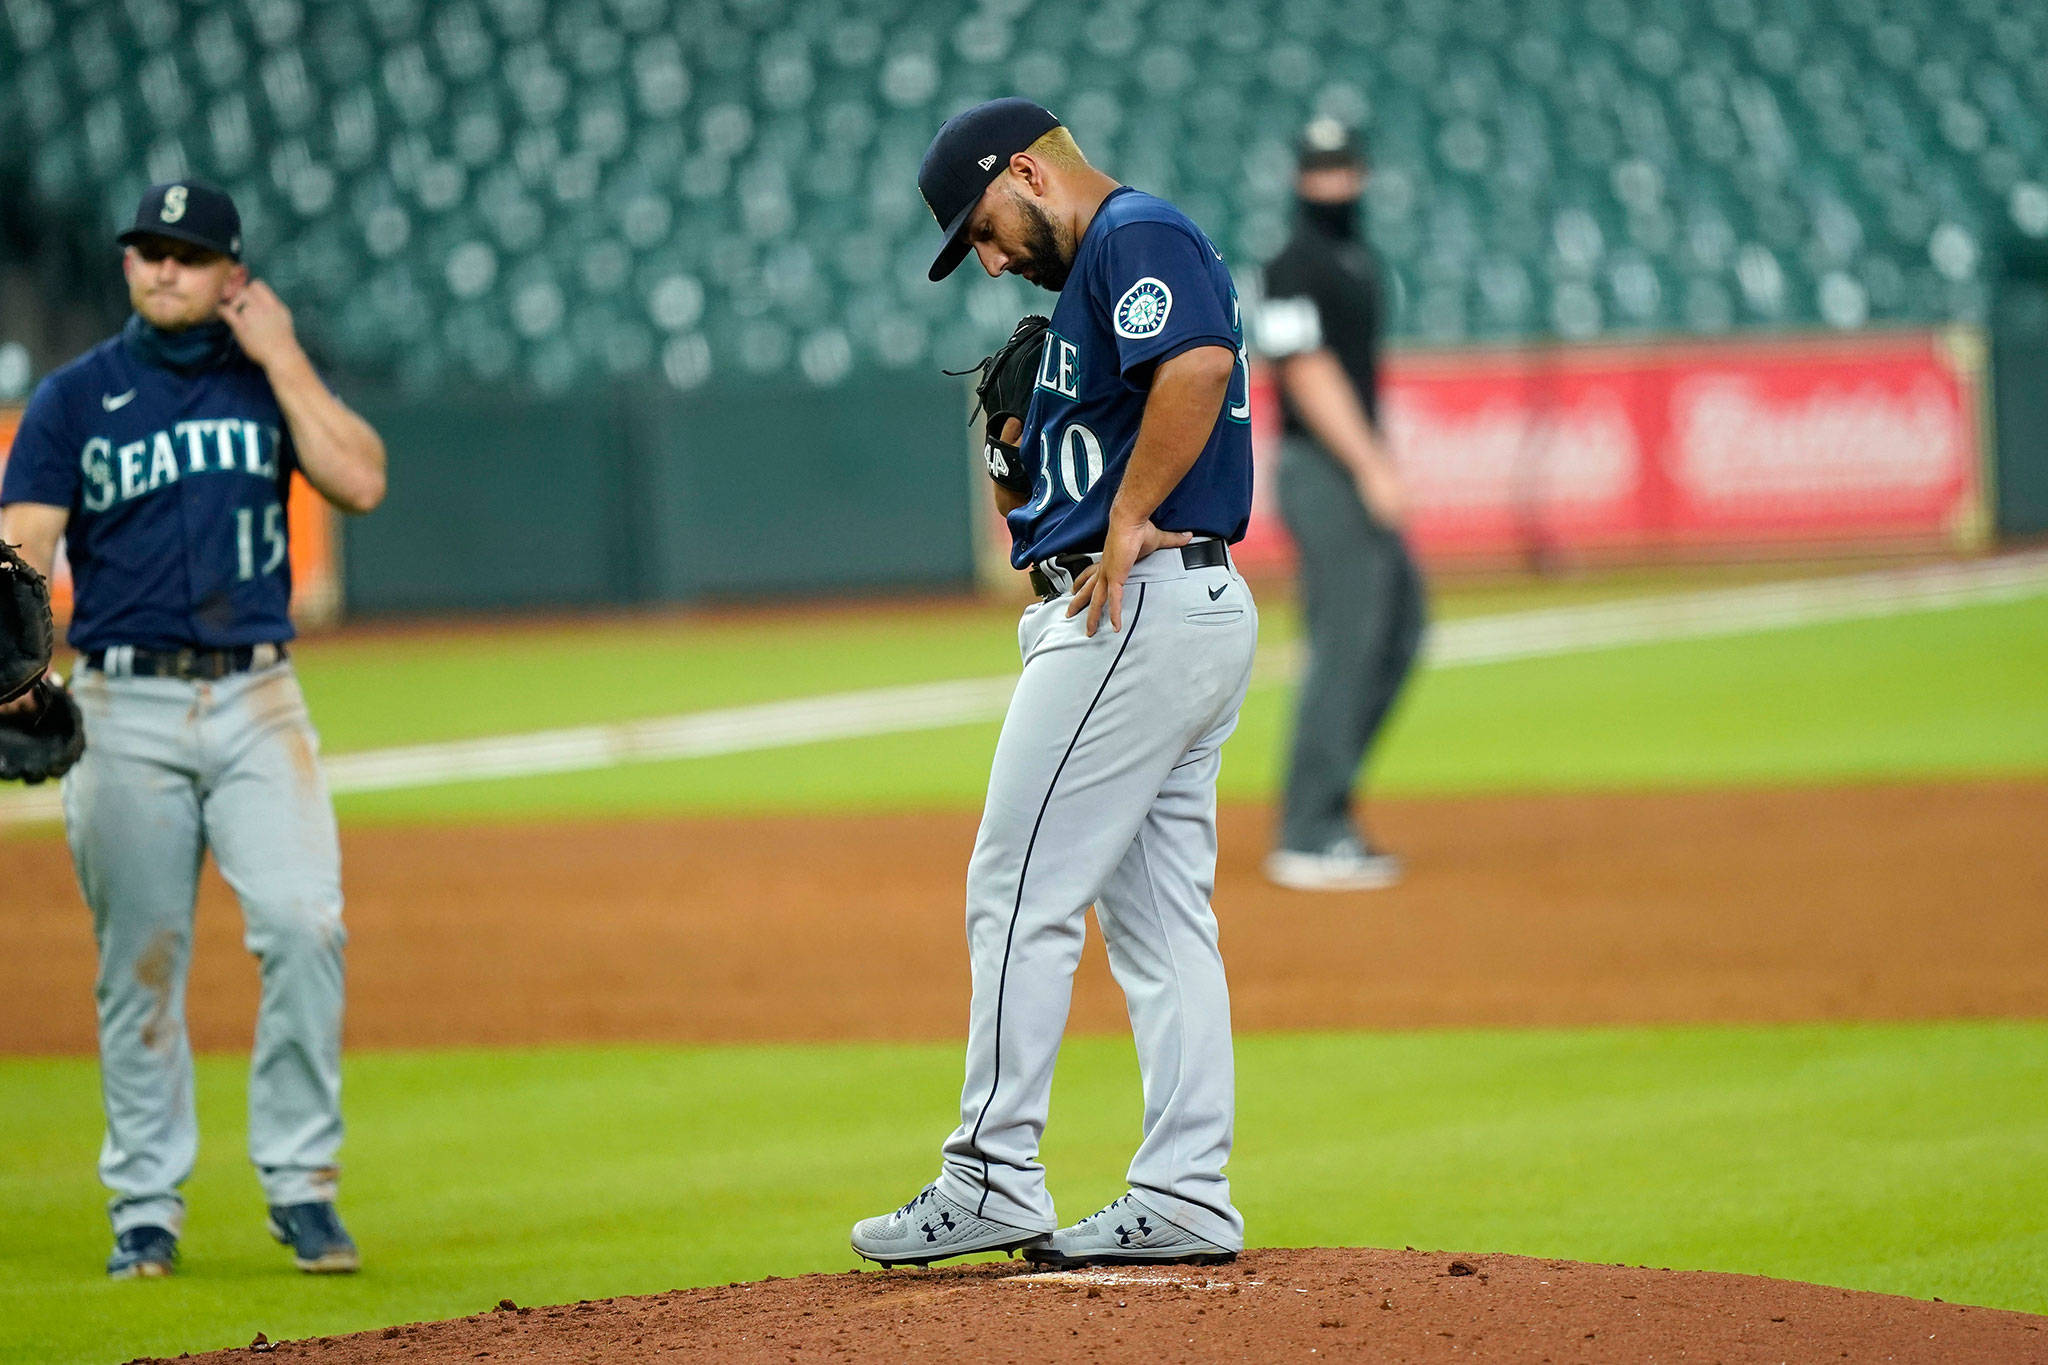 Mariners starting pitcher Nestor Cortes (30) waits for manager Scott Servais to make his way to the mound to pull him during the first inning of a game against the Astros on Aug. 14, 2020, in Houston. (AP Photo/David J. Phillip)